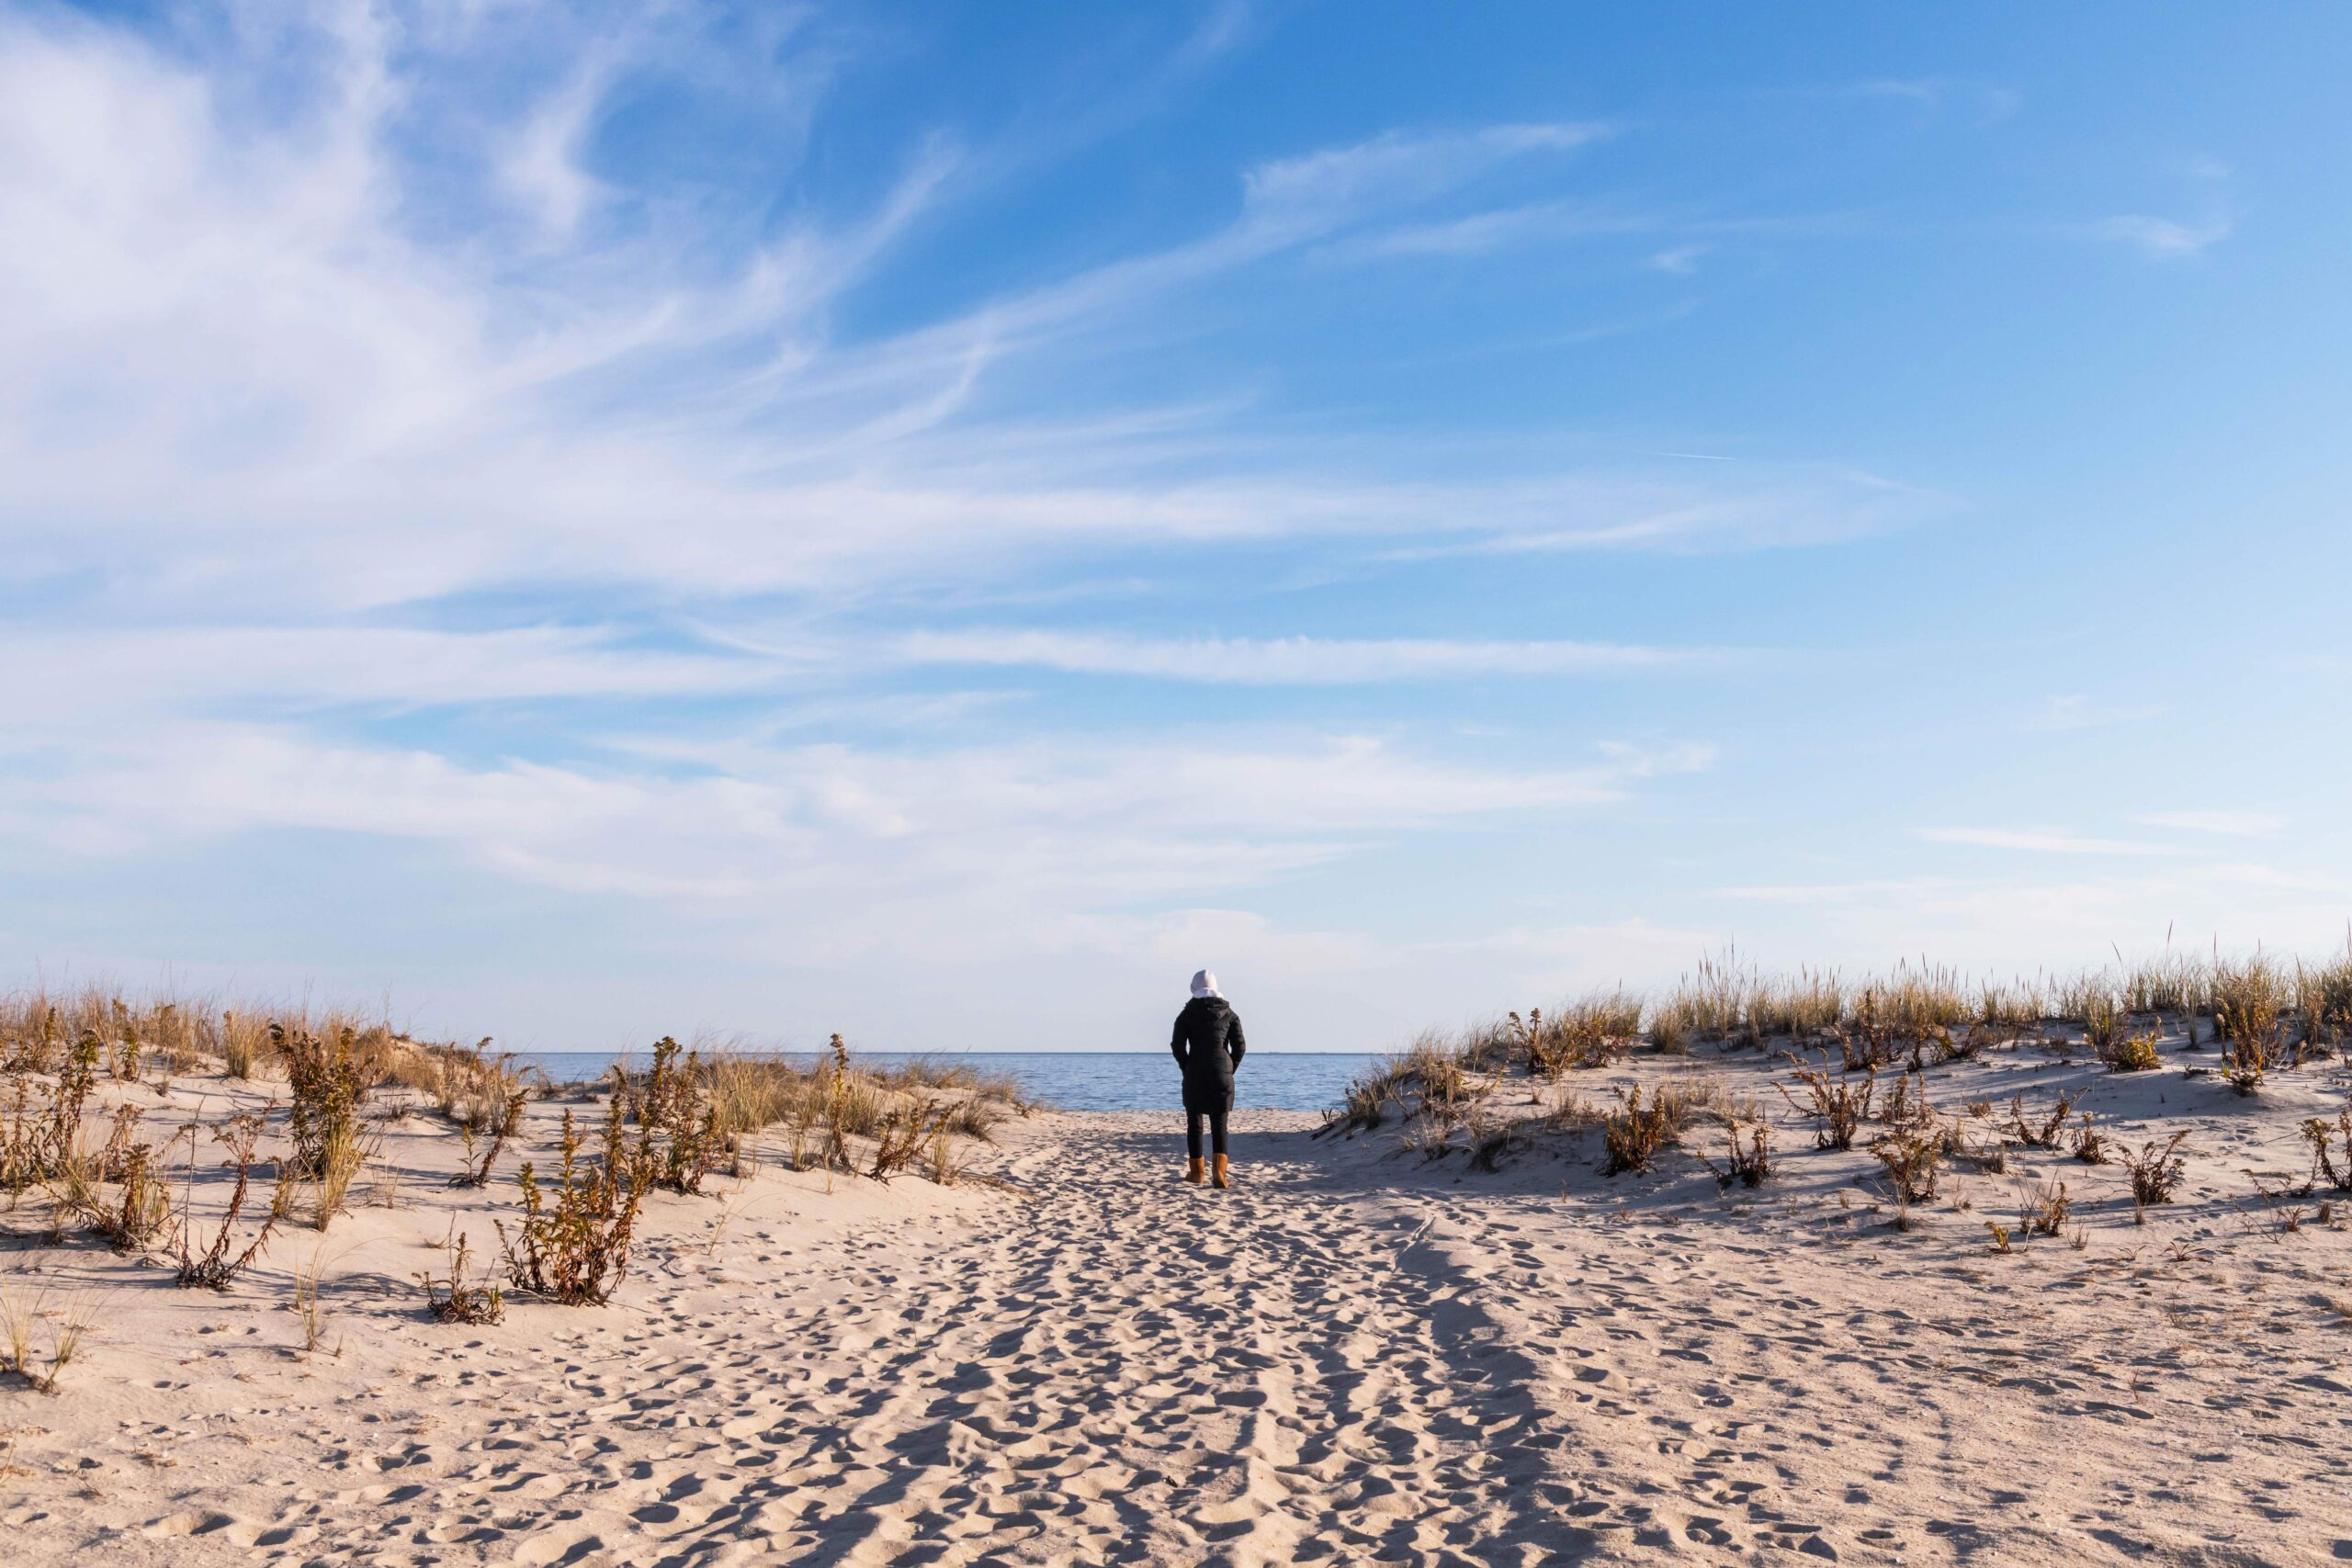 A person bundled up walking down a path on the beach with dunes on either side. There are wispy white clouds in the blue sky and the ocean is in the distance